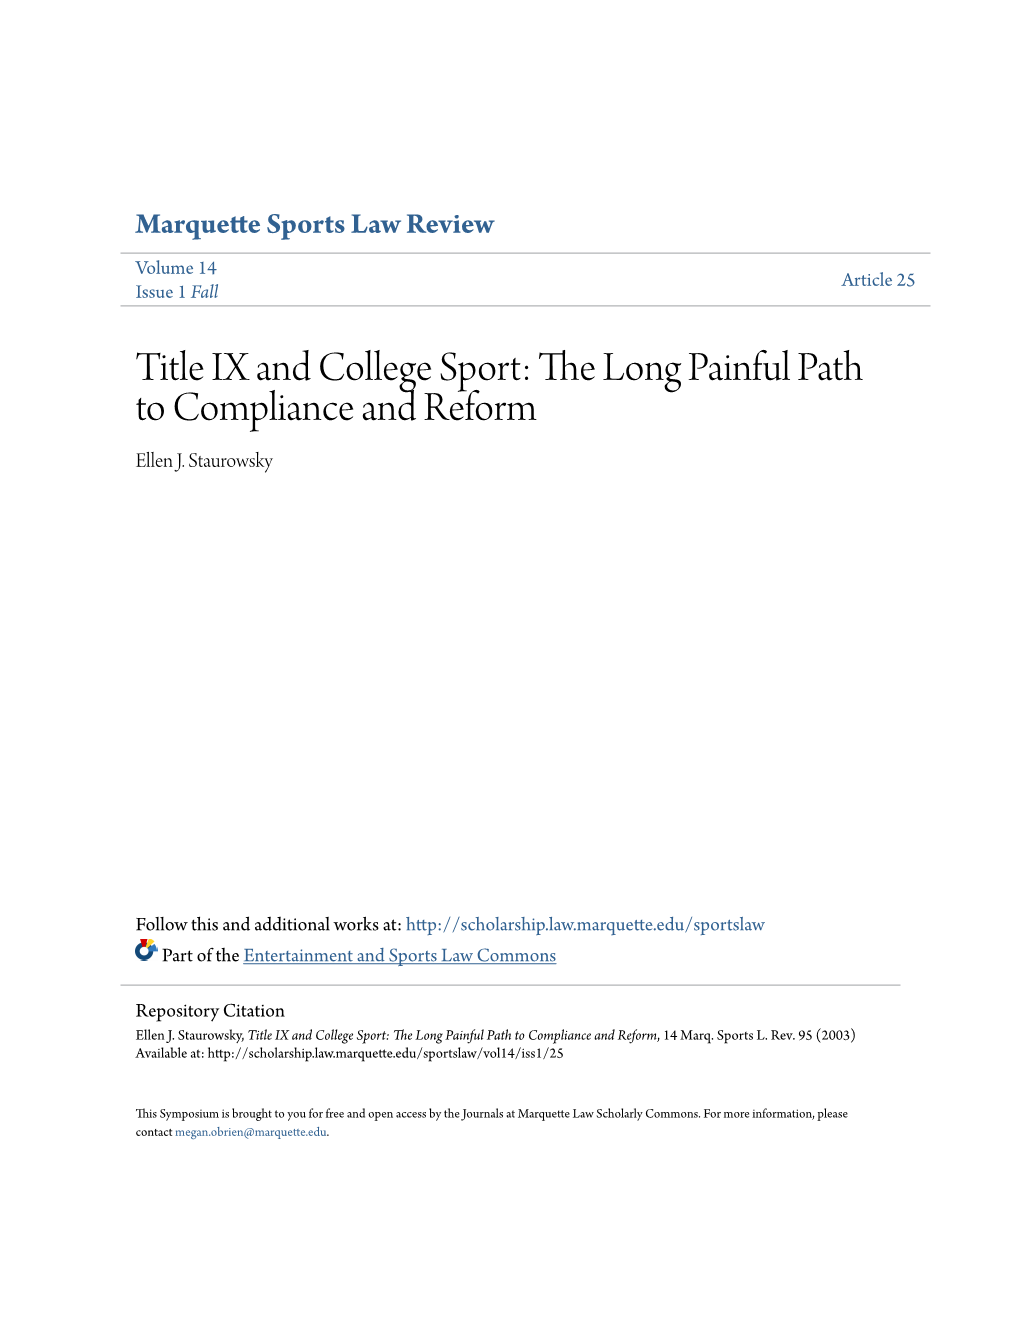 Title IX and College Sport: the Long Painful Path to Compliance and Reform Ellen J